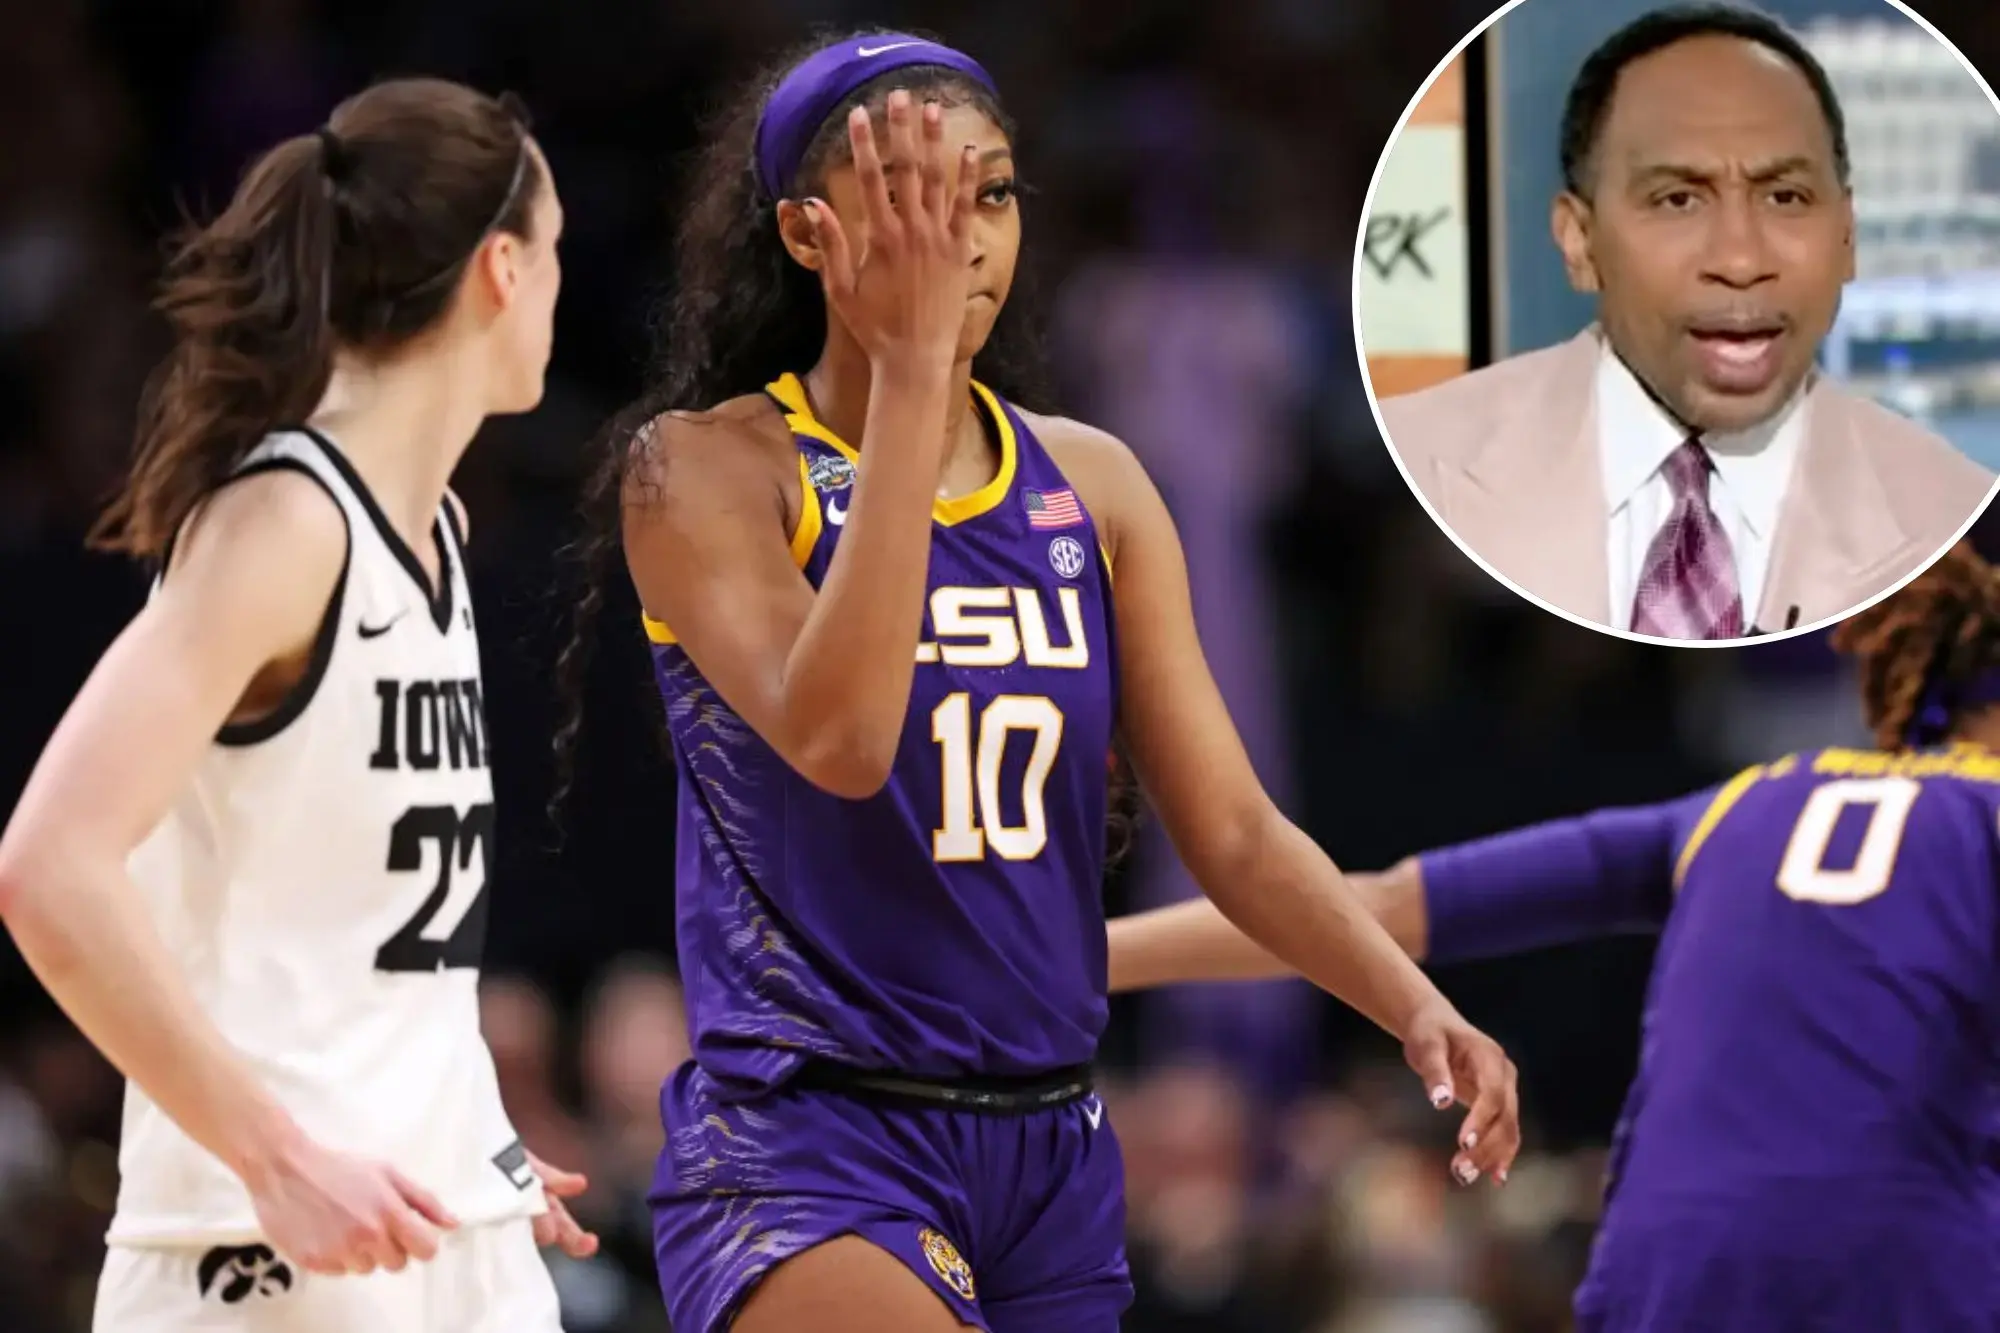 According to Stephen A. Smith, Angel Reese Implied That Caitlin Clark’s Race—White—Is the Reason She Is Receiving Support That Black Athletes Never Get